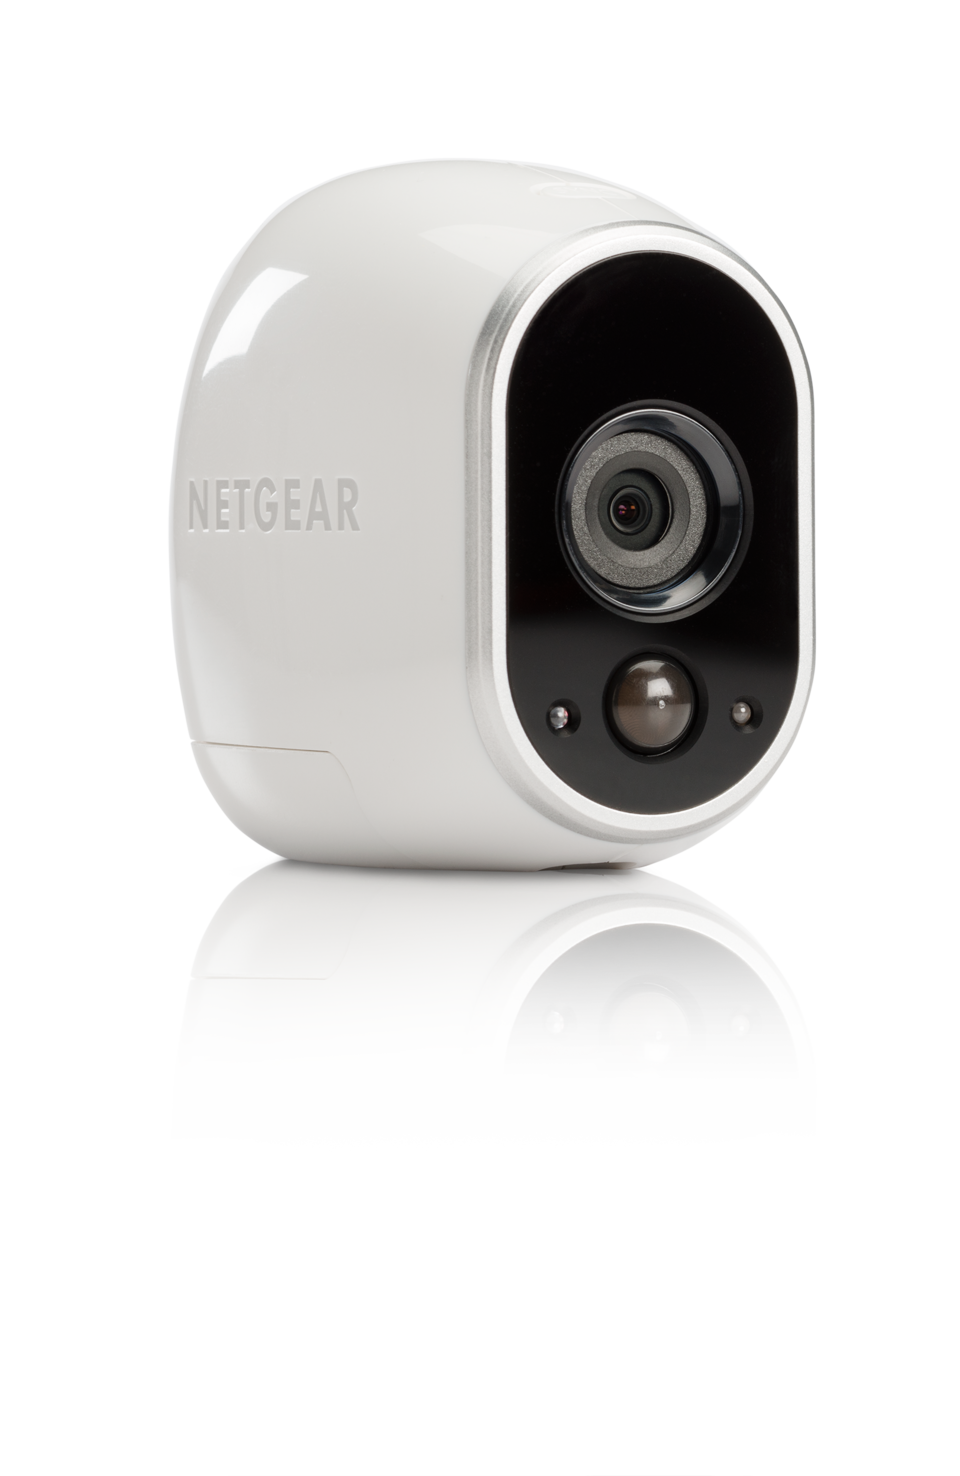 Arlo Security System Netgear Free PNG Image